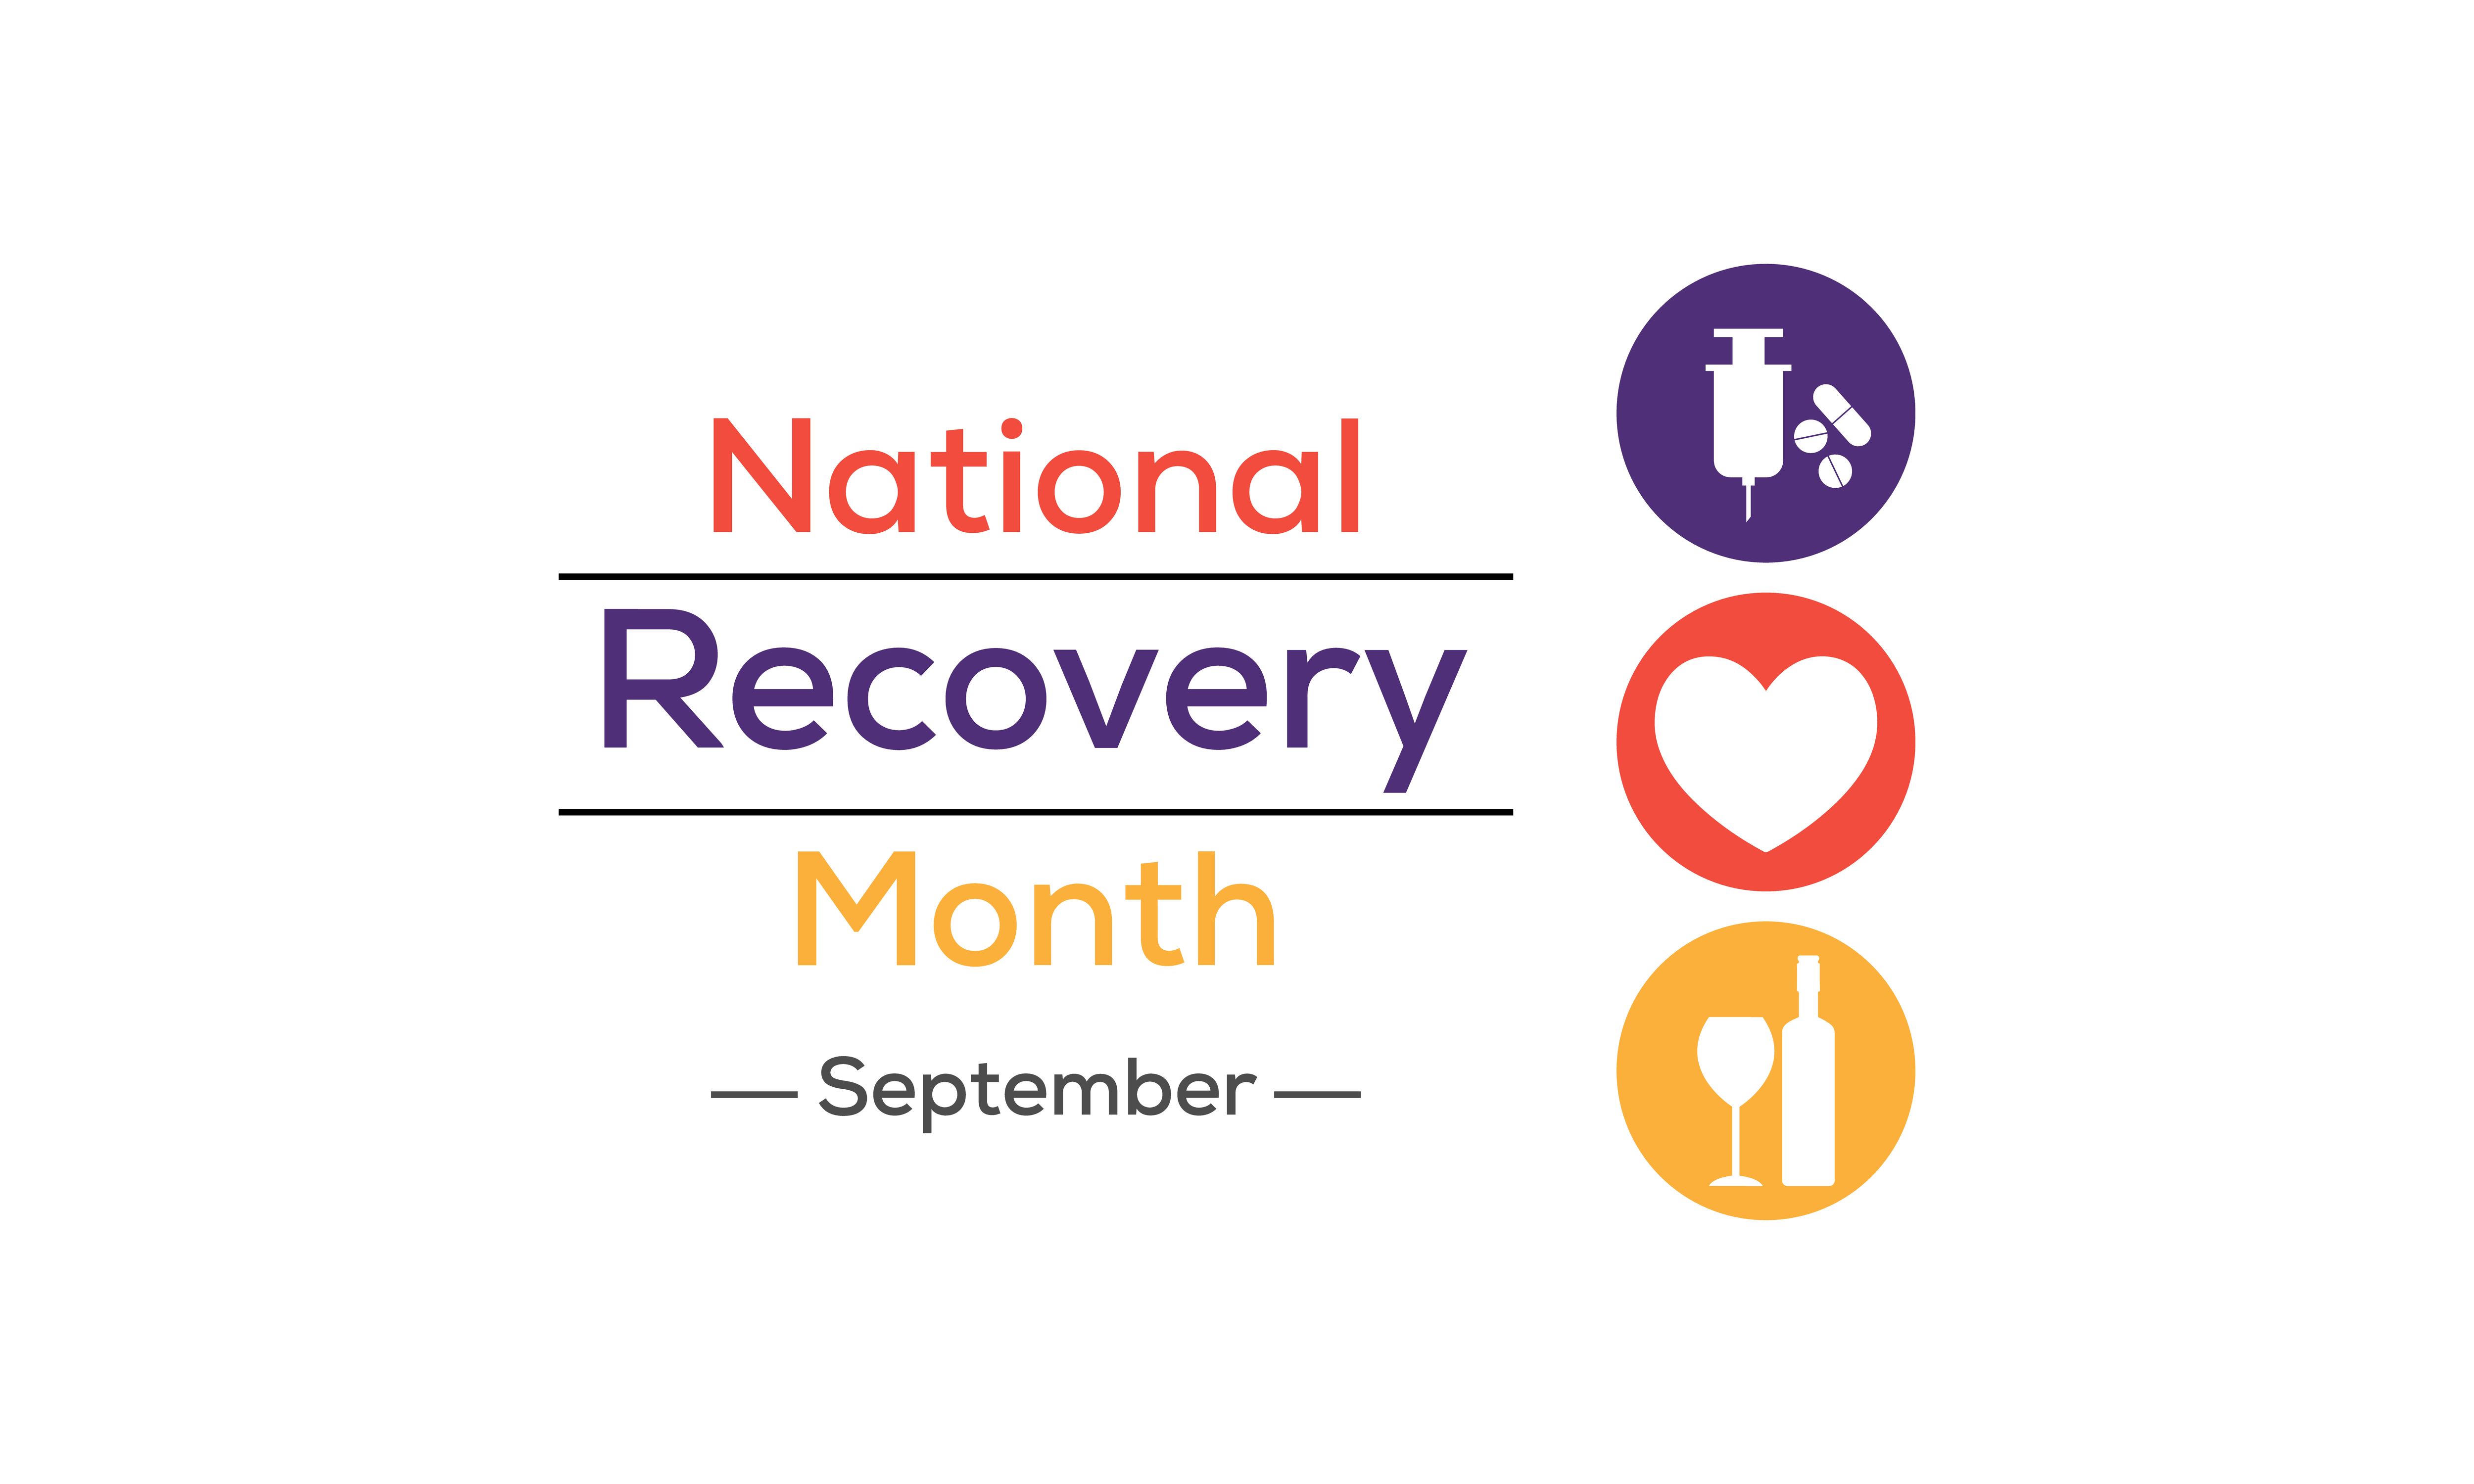 How to Observe National Recovery Month The Carter Treatment Center